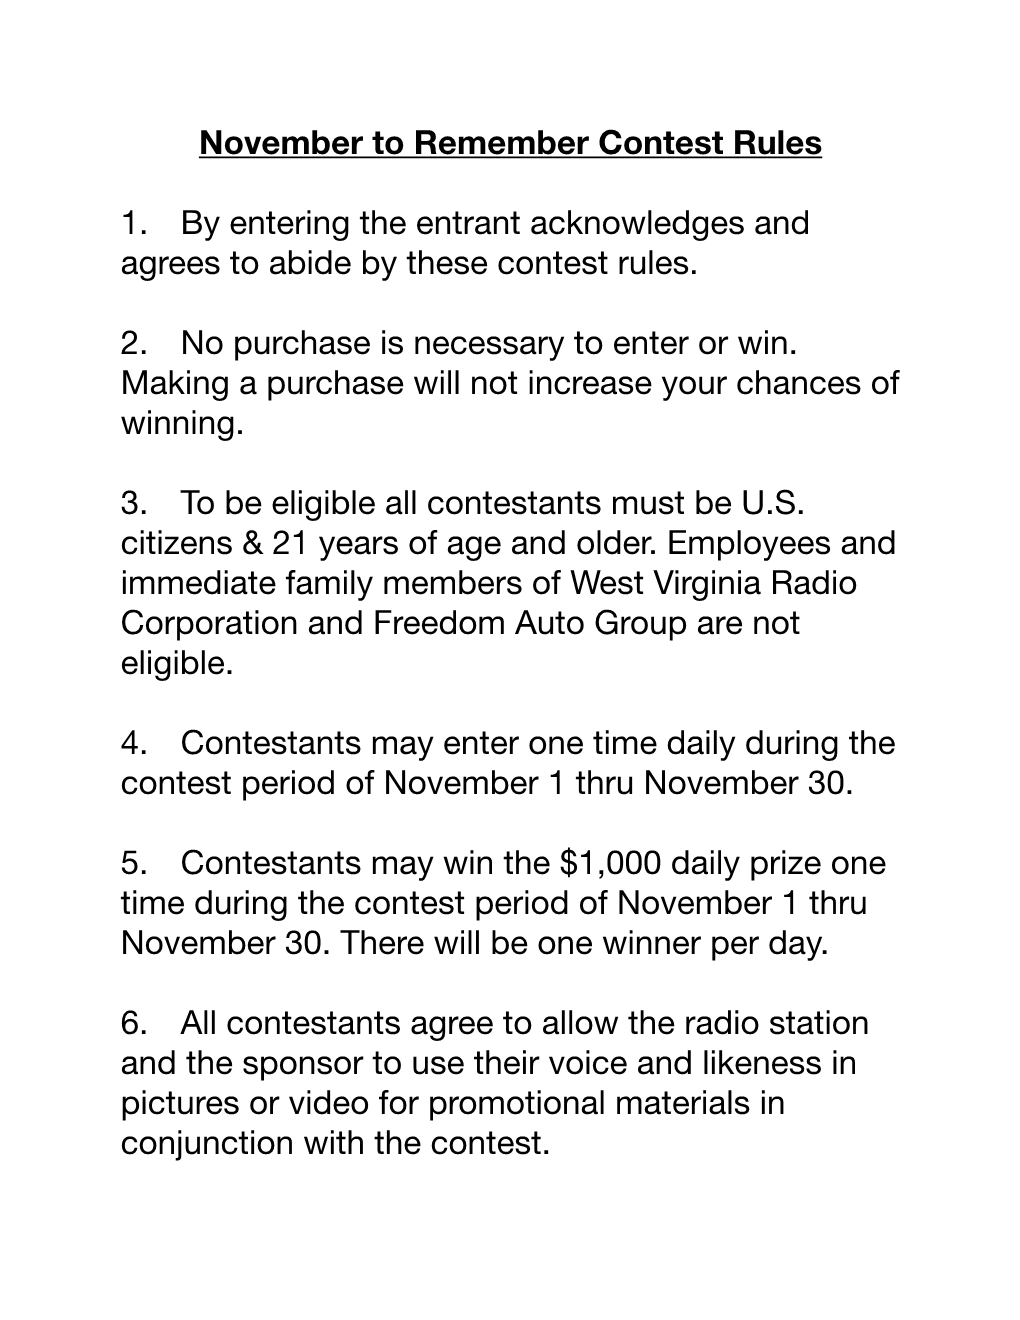 November to Remember Contest Rules 1. by Entering The